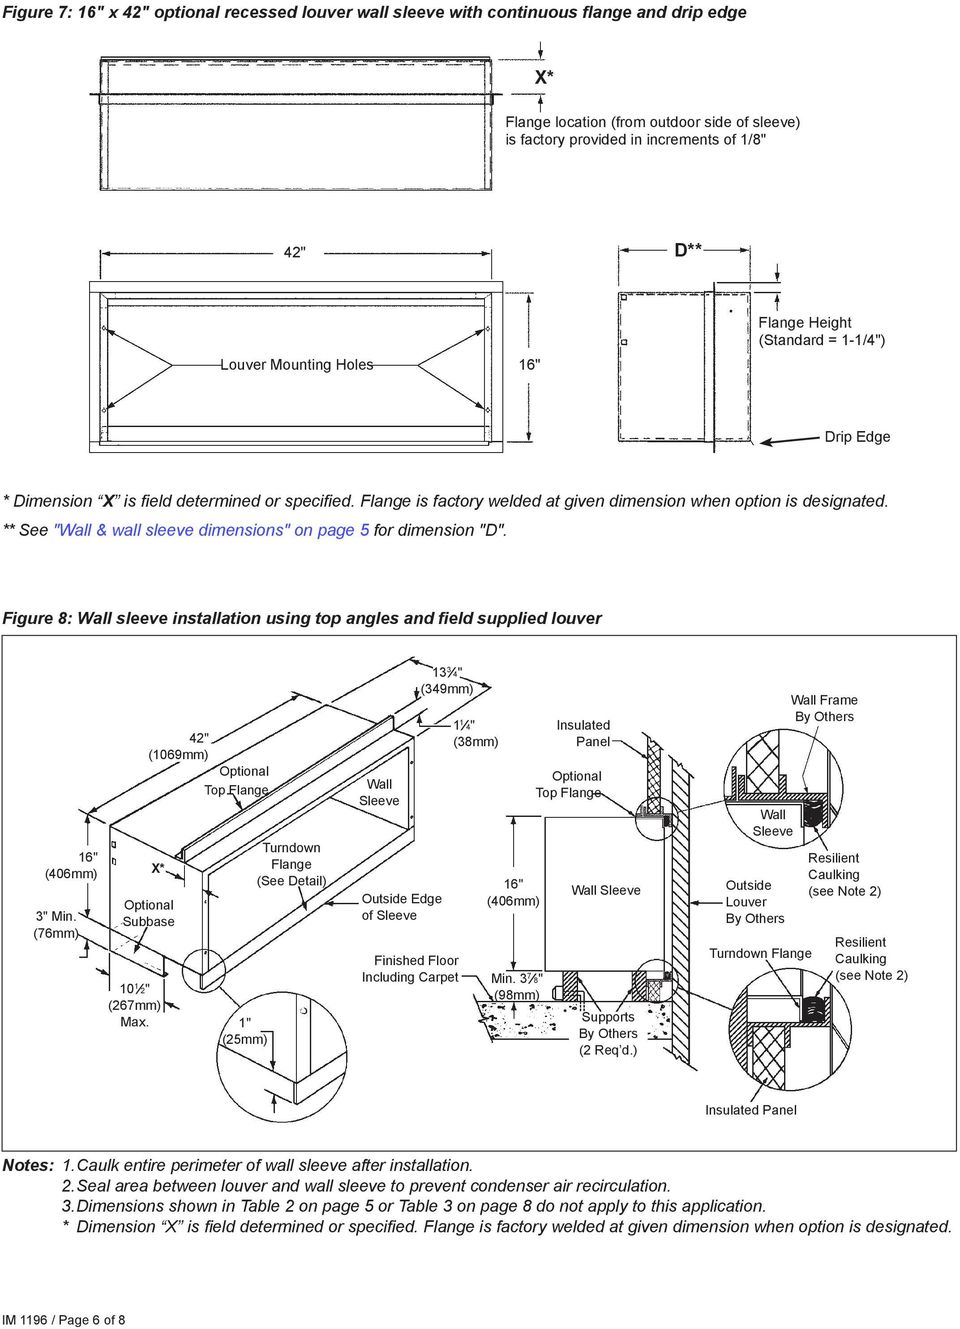 ** See "Wall & wall sleeve dimensions" on page 5 for dimension "D". Figure 8: Wall sleeve installation using top angles and field supplied louver (406mm) 3" Min.